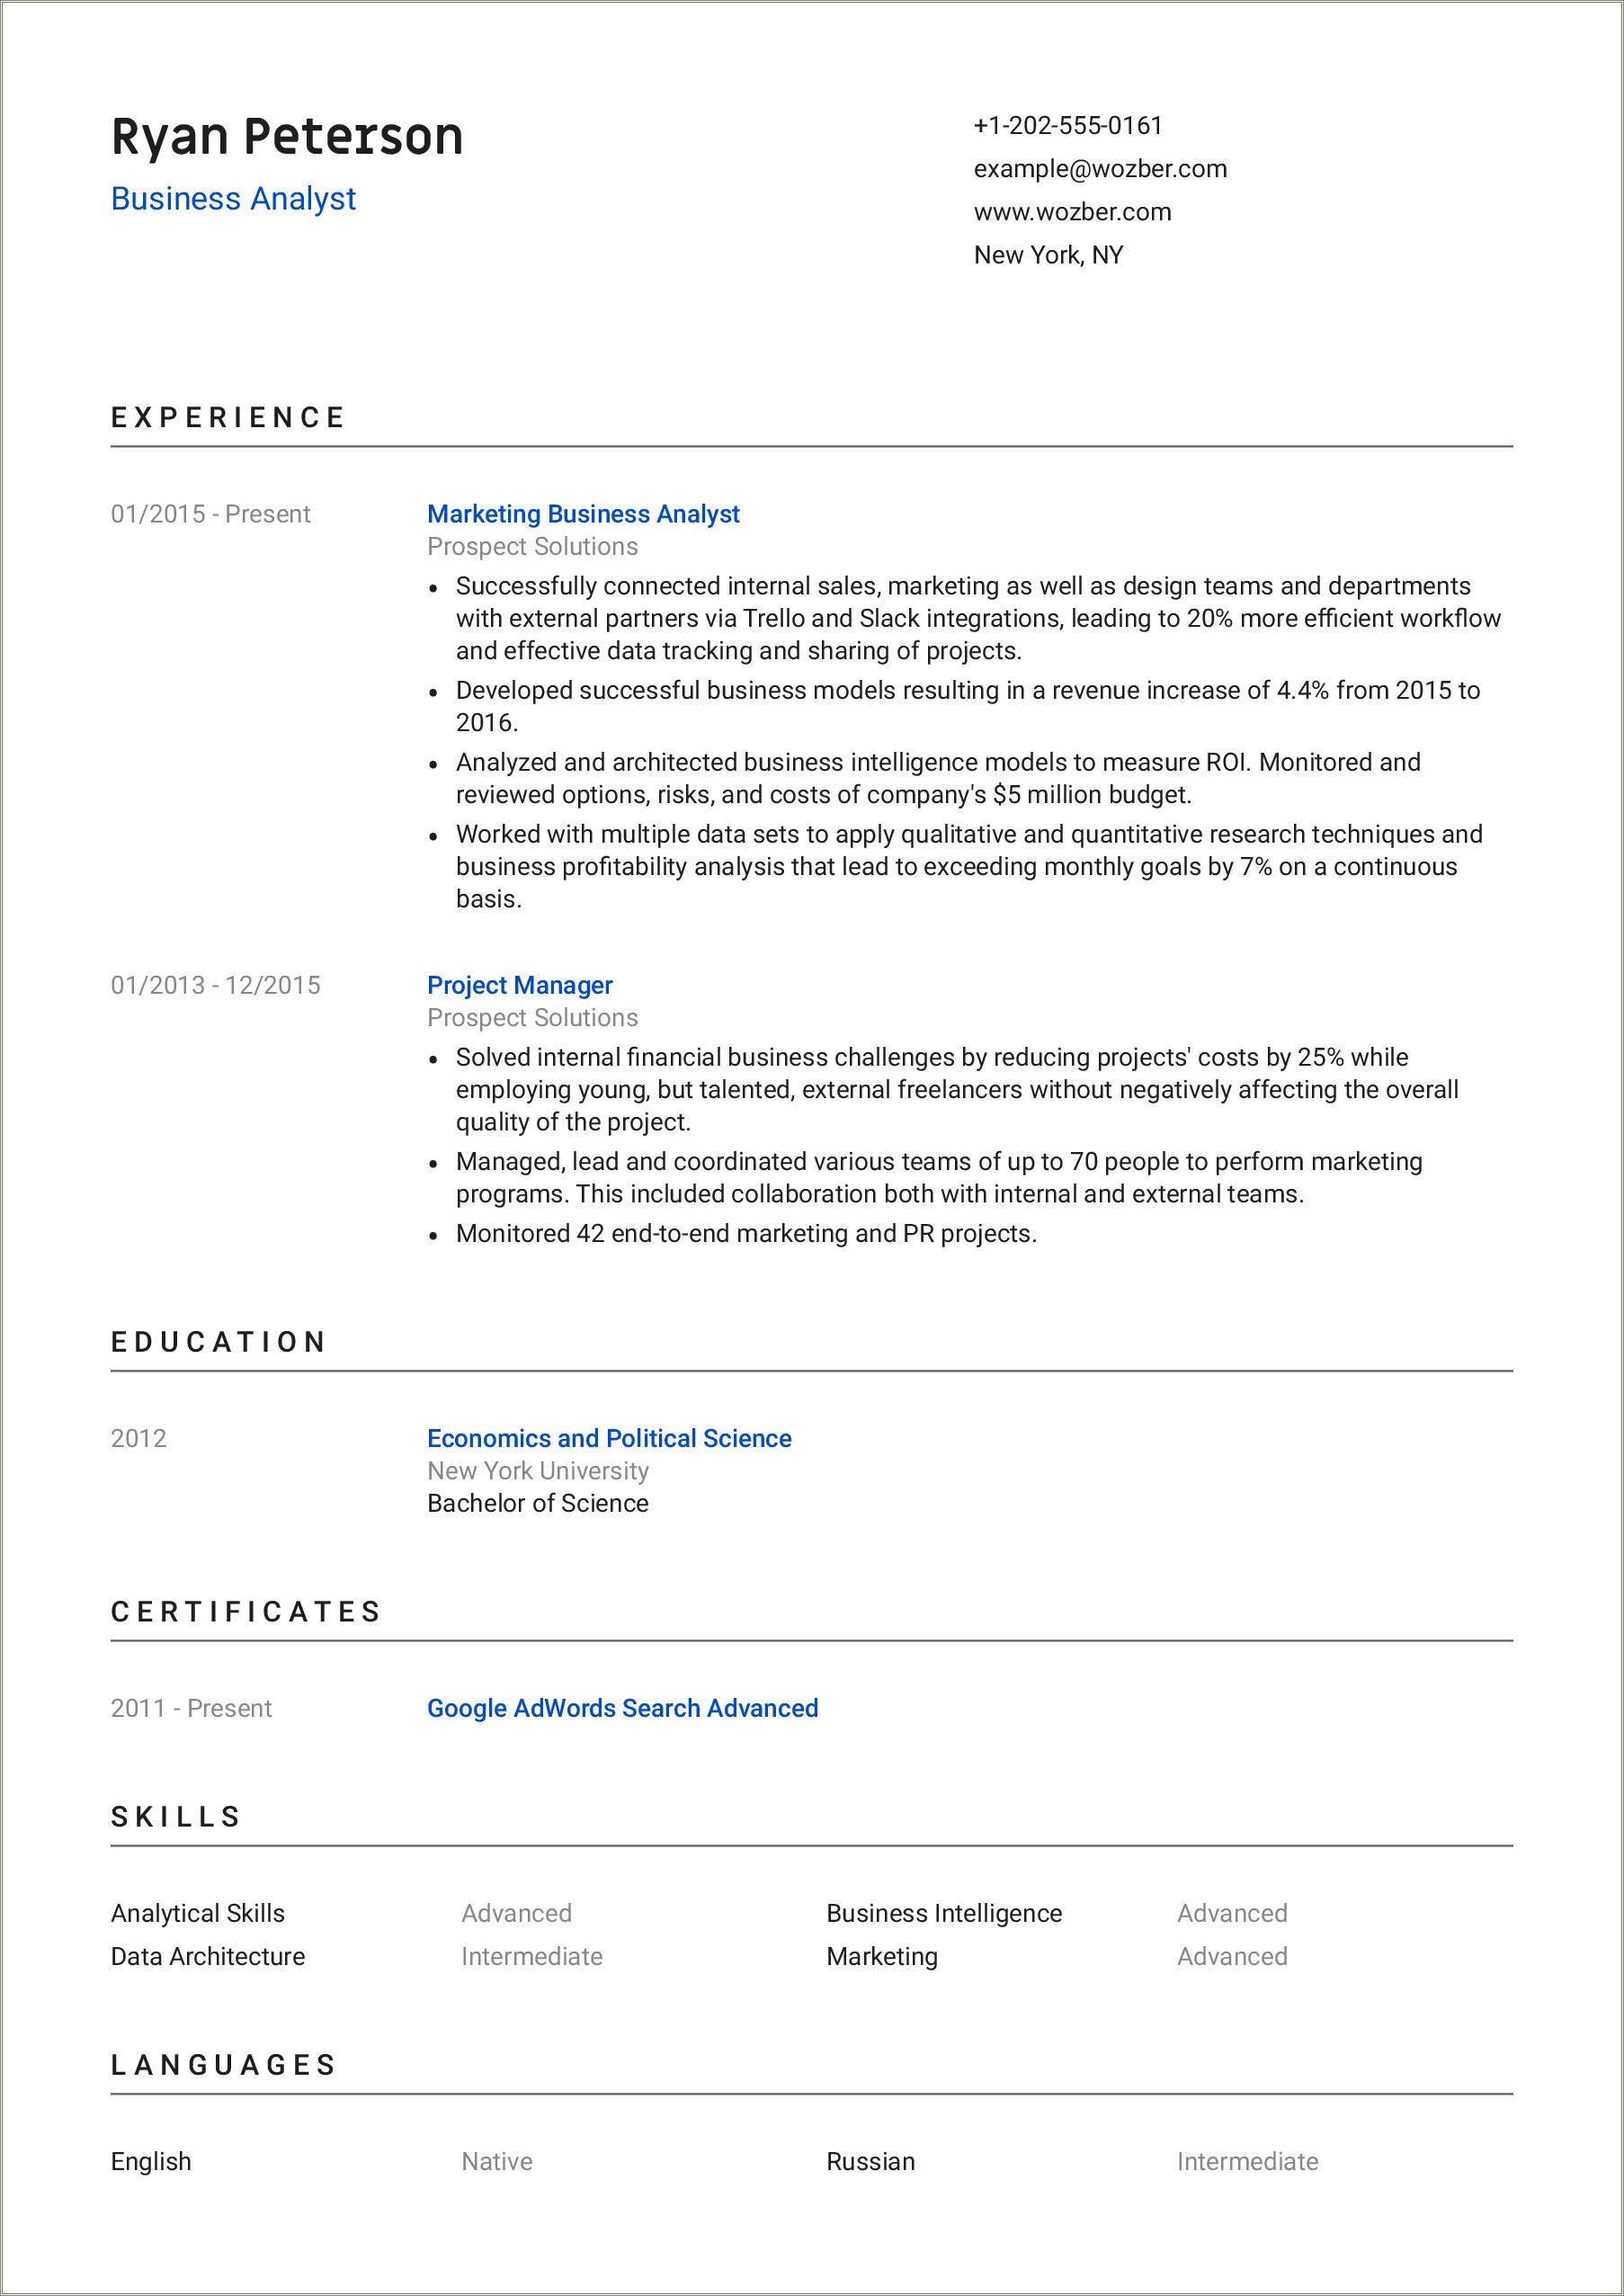 Examples Of A Business Analyst Resume